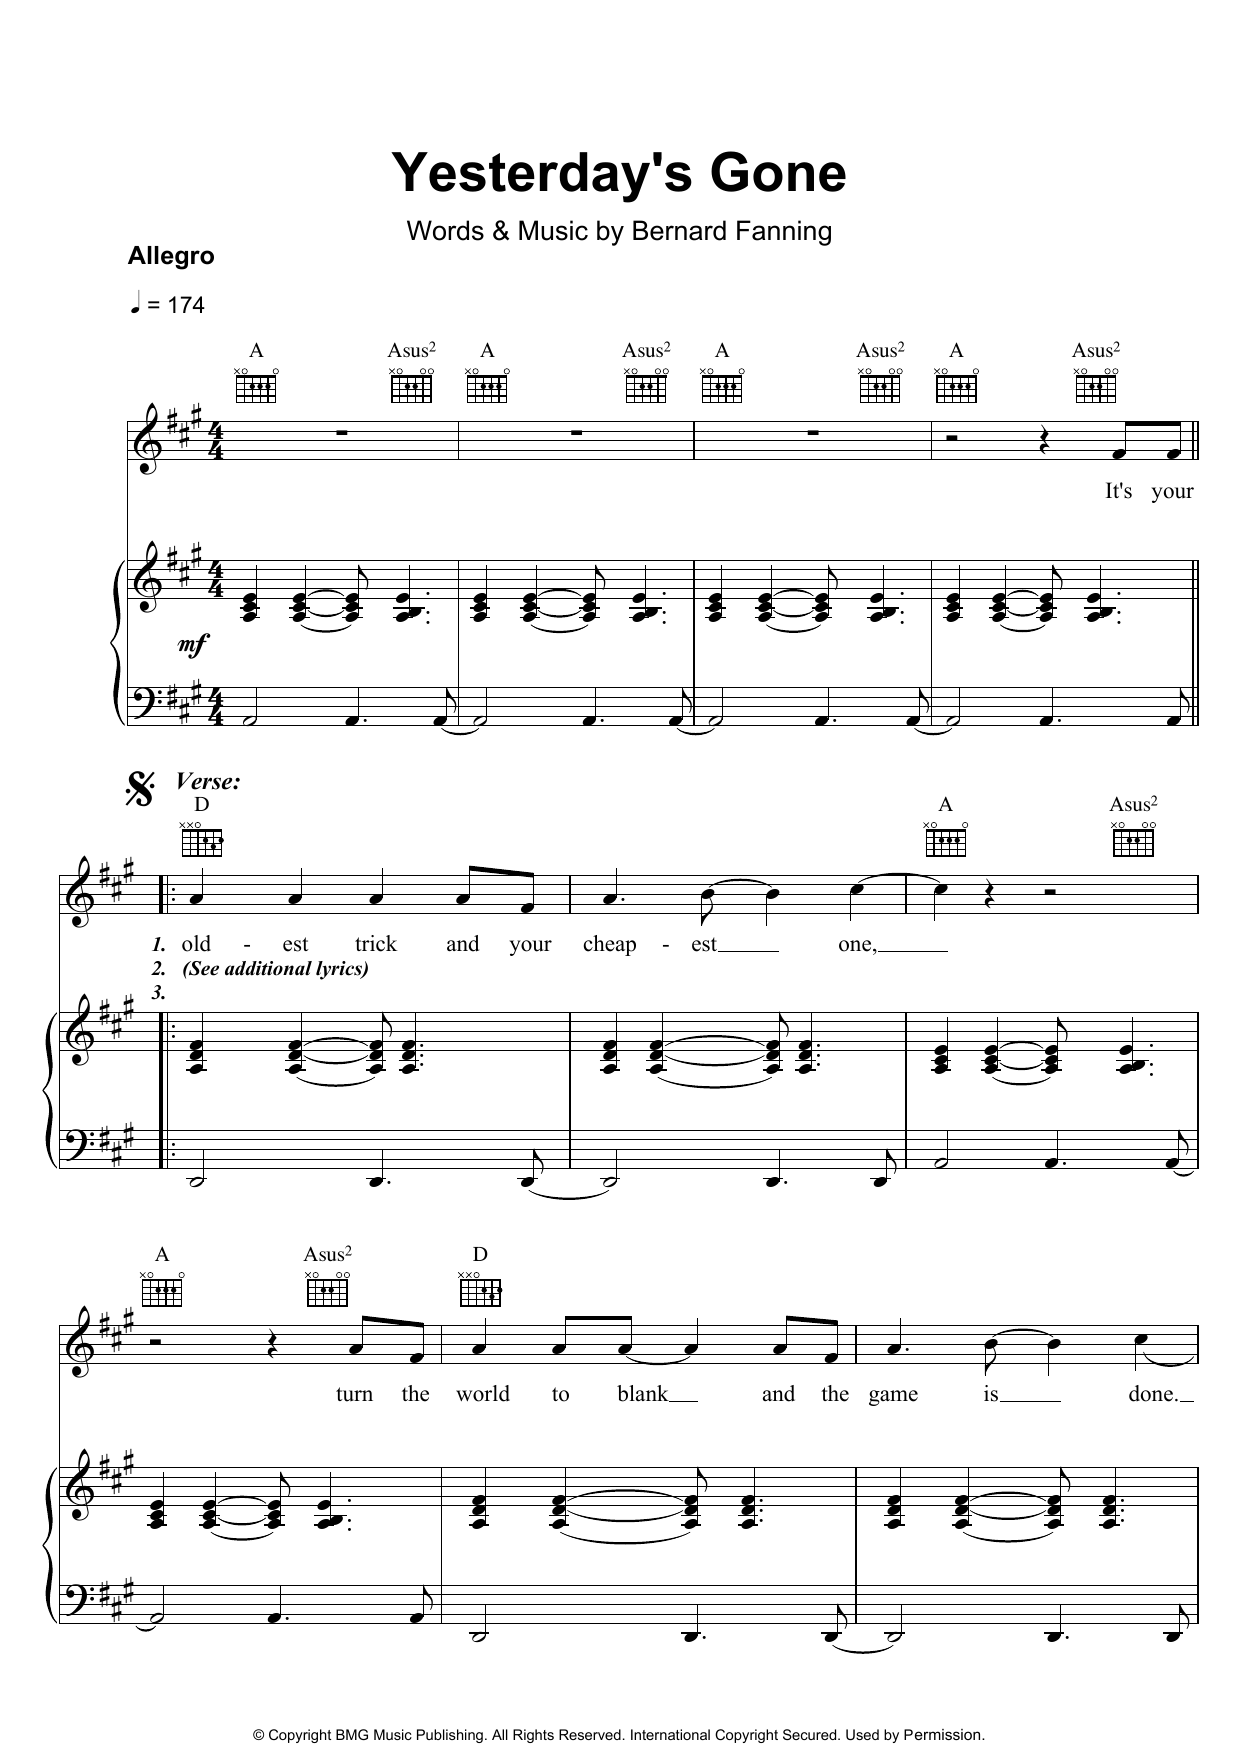 Bernard Fanning Yesterday's Gone sheet music preview music notes and score for Piano, Vocal & Guitar including 5 page(s)